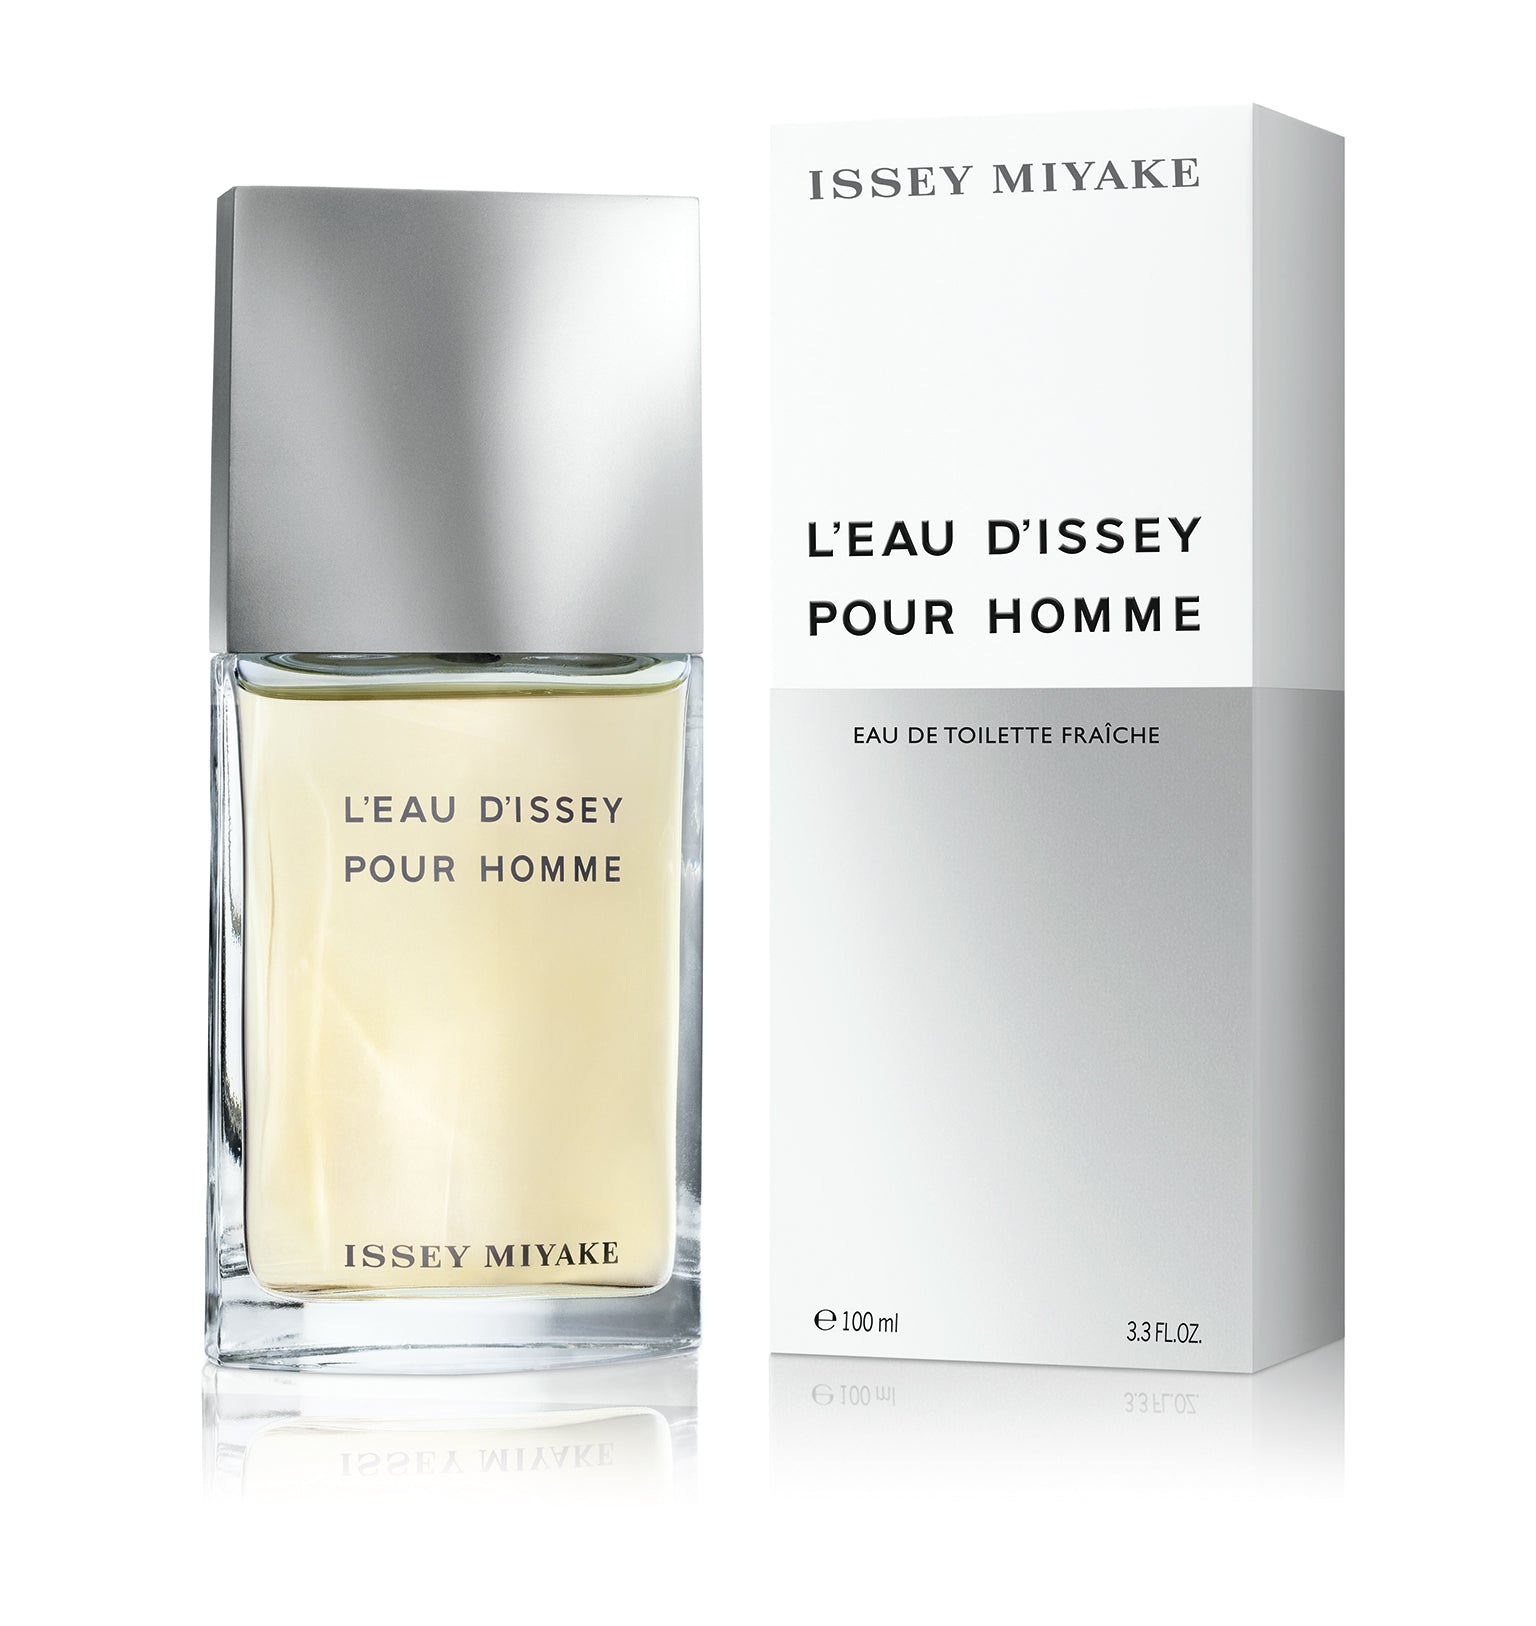 Issey Miyake L'eau d'Issey Pour Homme 125ml Edt | Buy Perfume Online